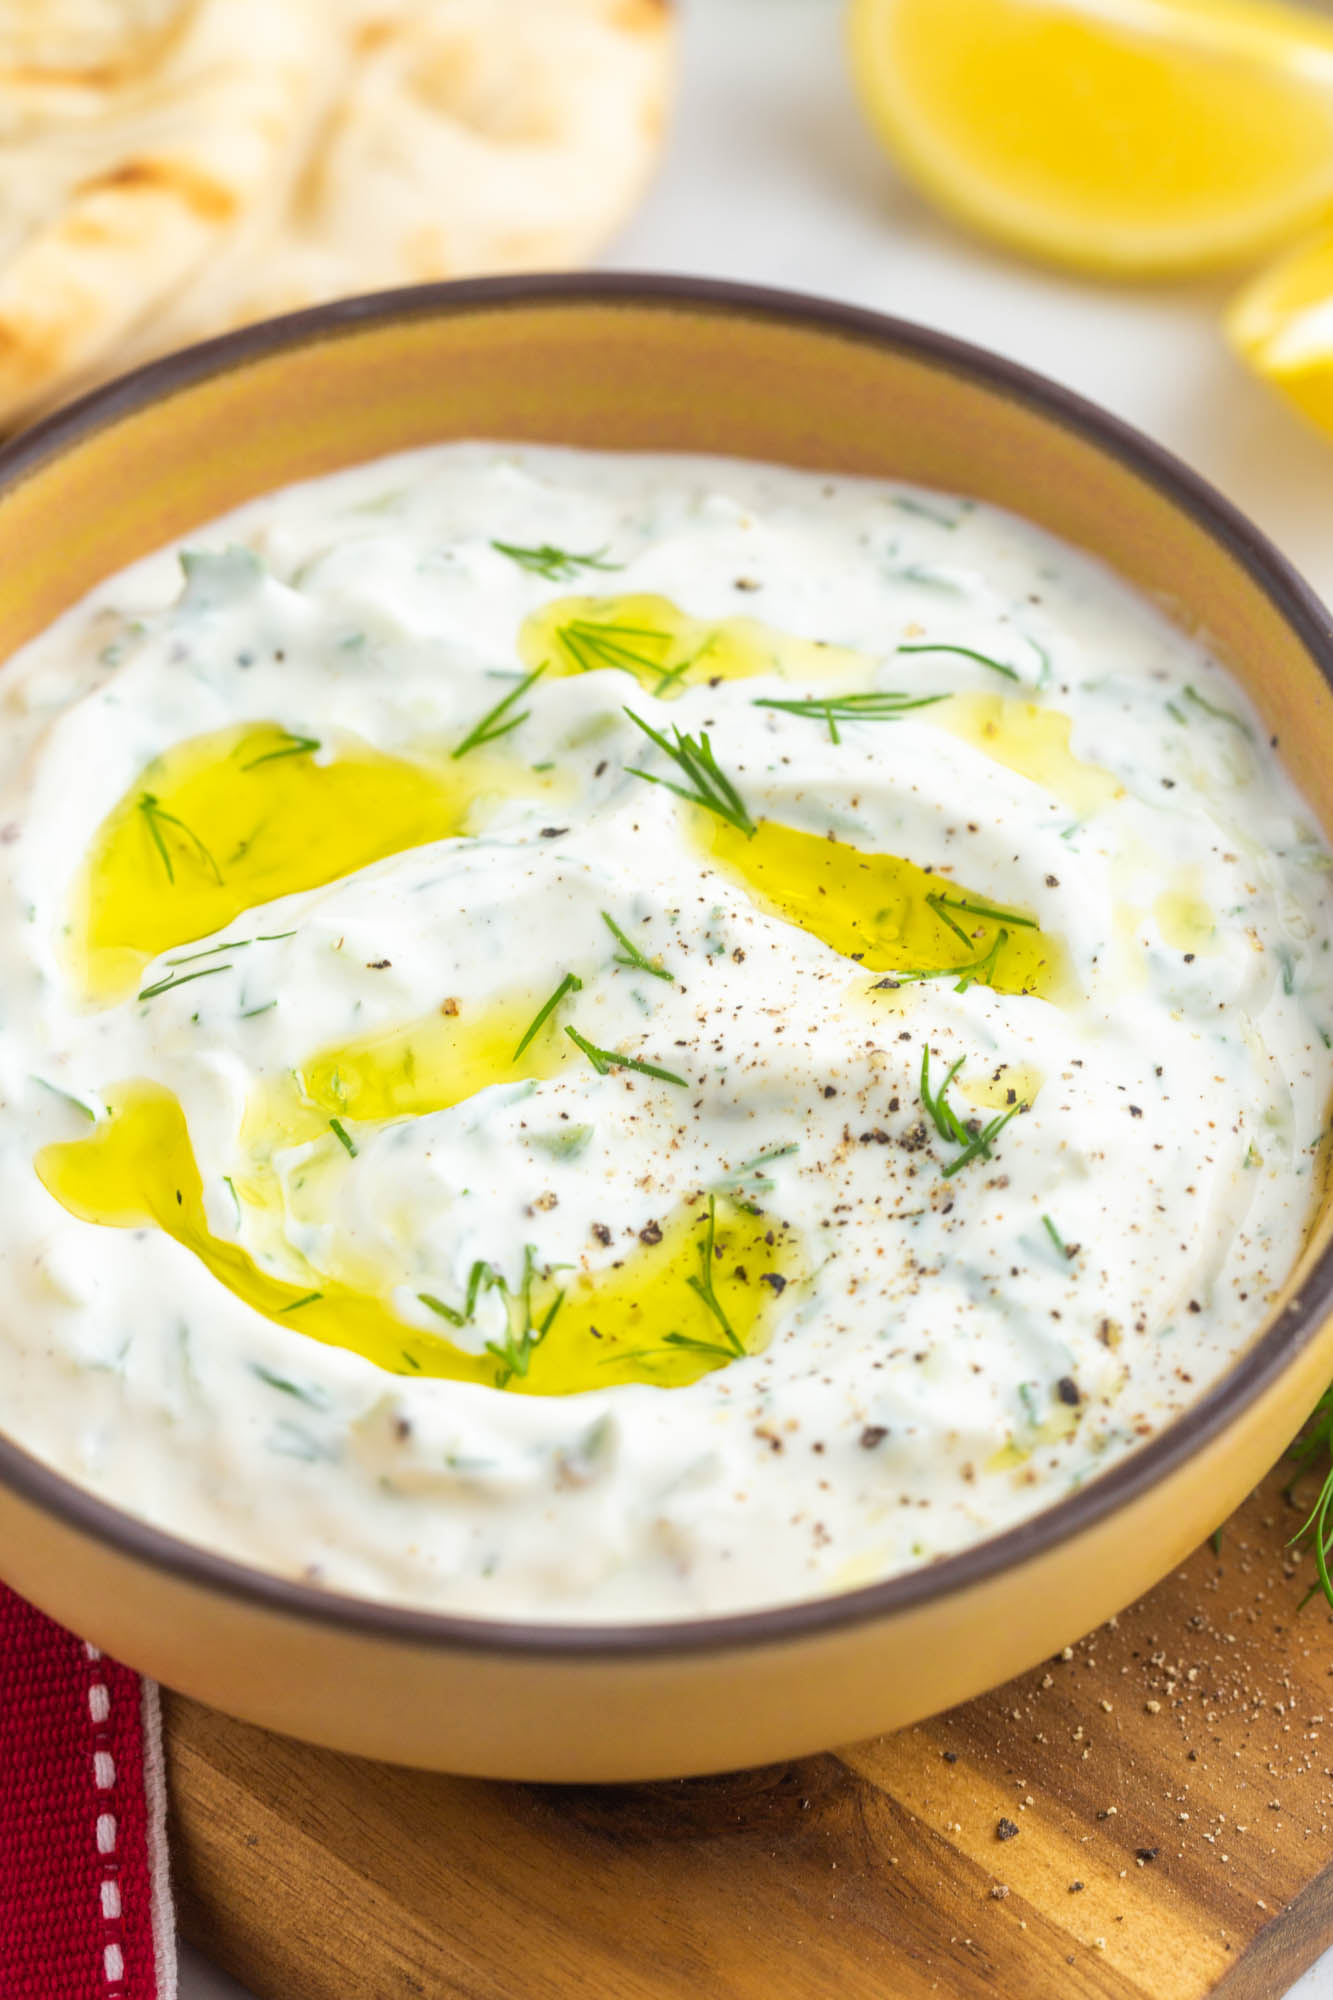 A bowl of creamy tzatziki dip, drizzled with olive oil and garnished with fresh dill.